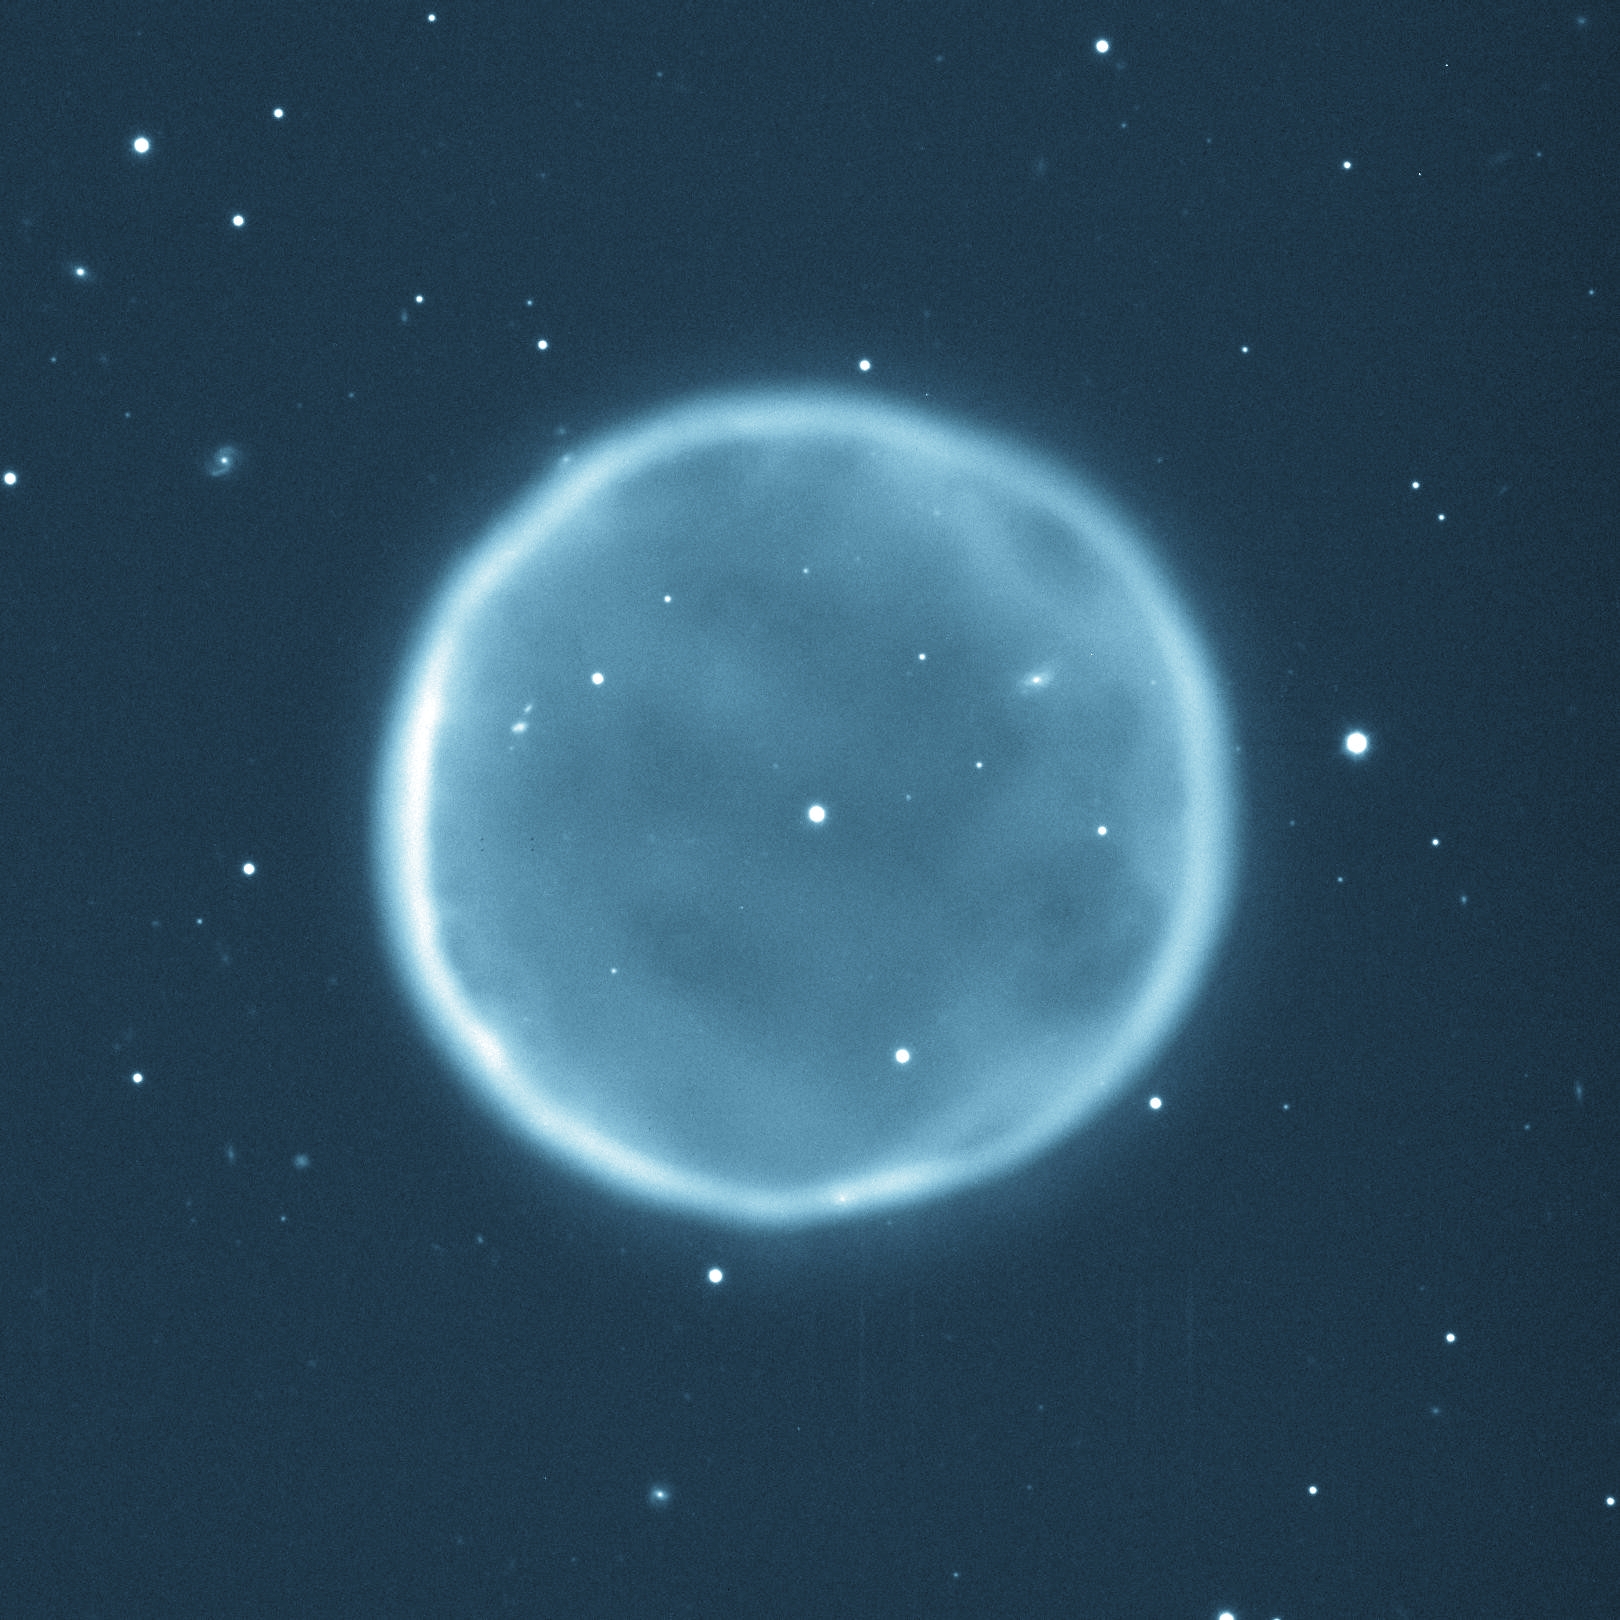 NOAO Image of Abell 39